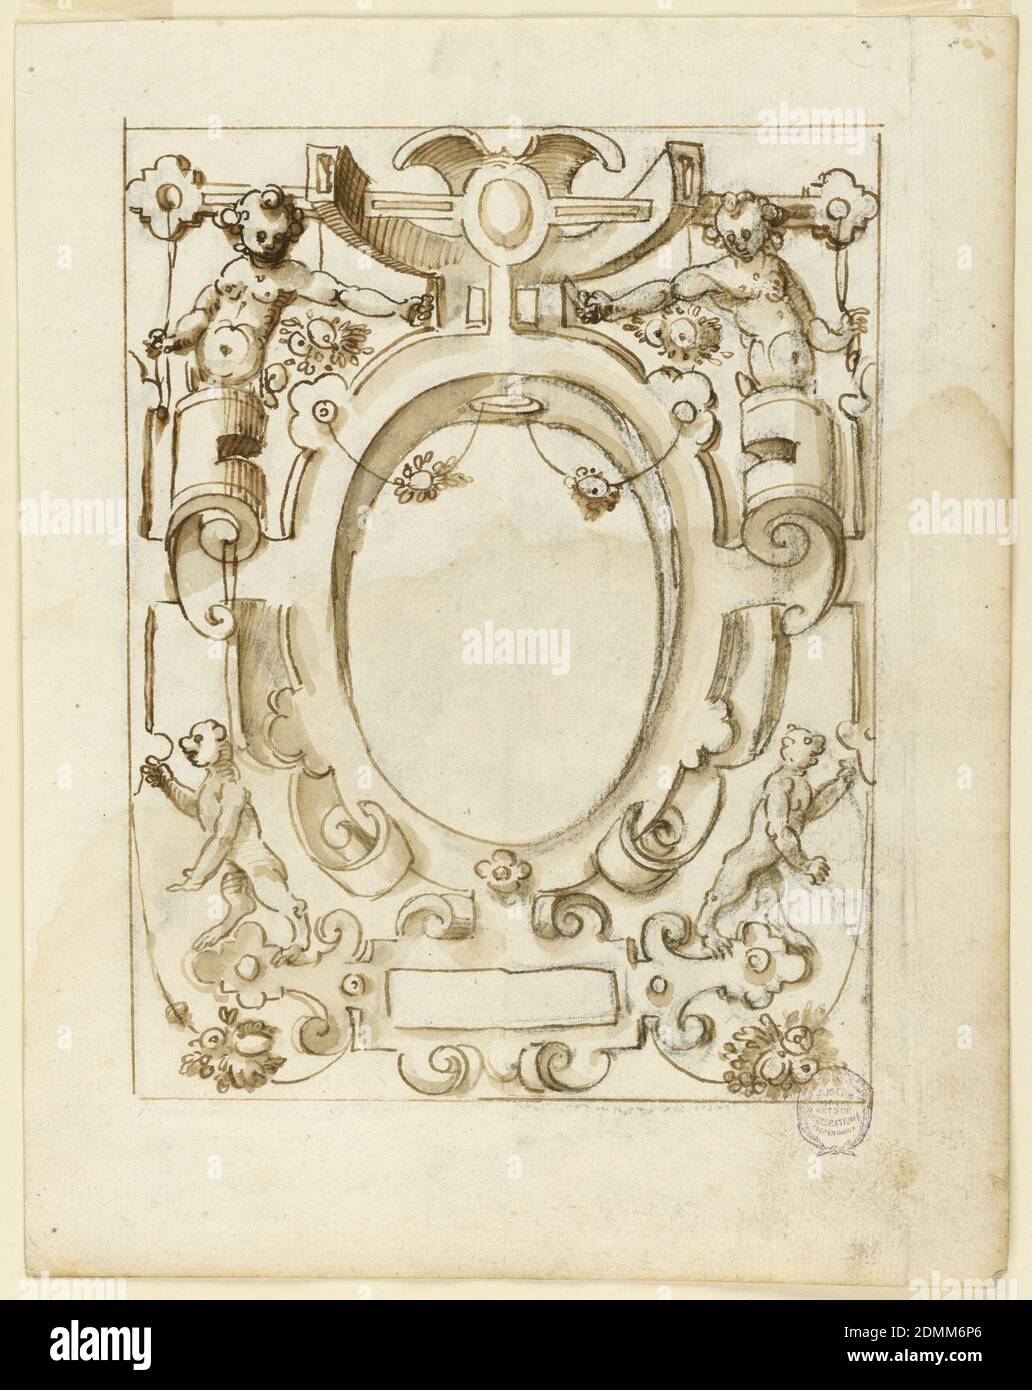 Grotesque Design, Charcoal, pen and ink, brush and watercolor on paper, Strapwork with putti and bears frames a blank oval panel., Italy, early 17th century, ornament, Drawing Stock Photo